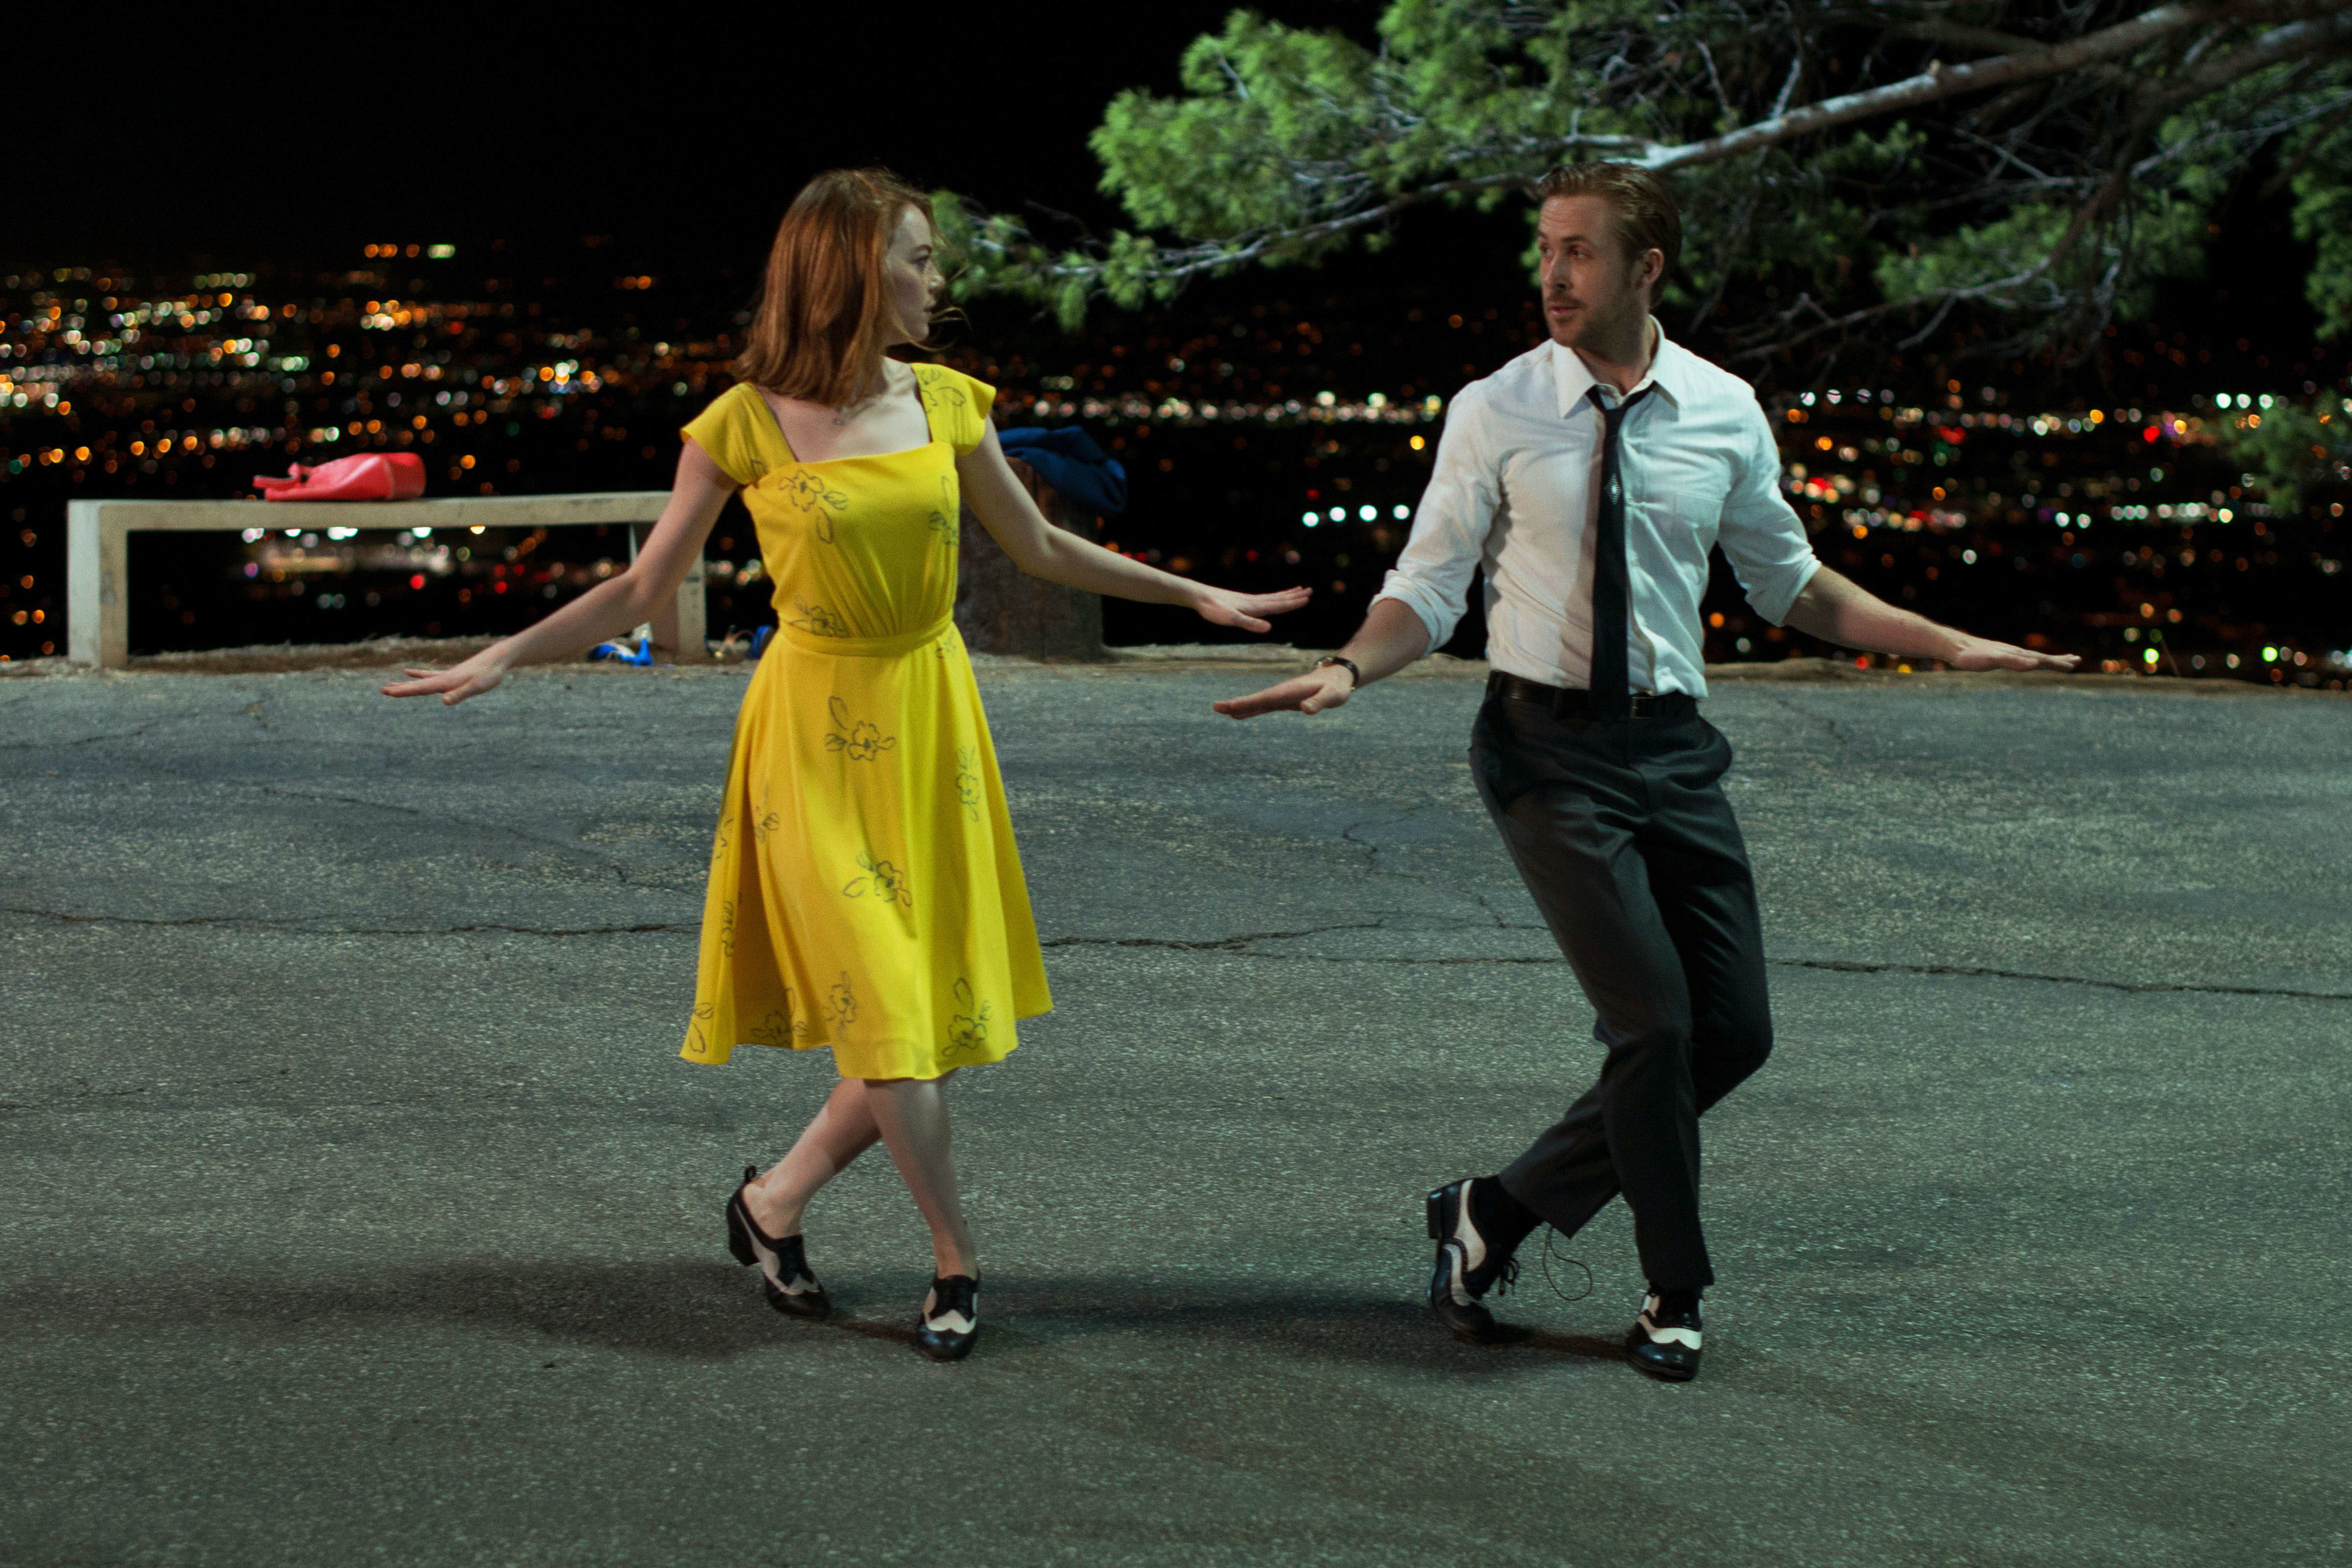 Emma Stone and Ryan Gosling dancing in the street at night